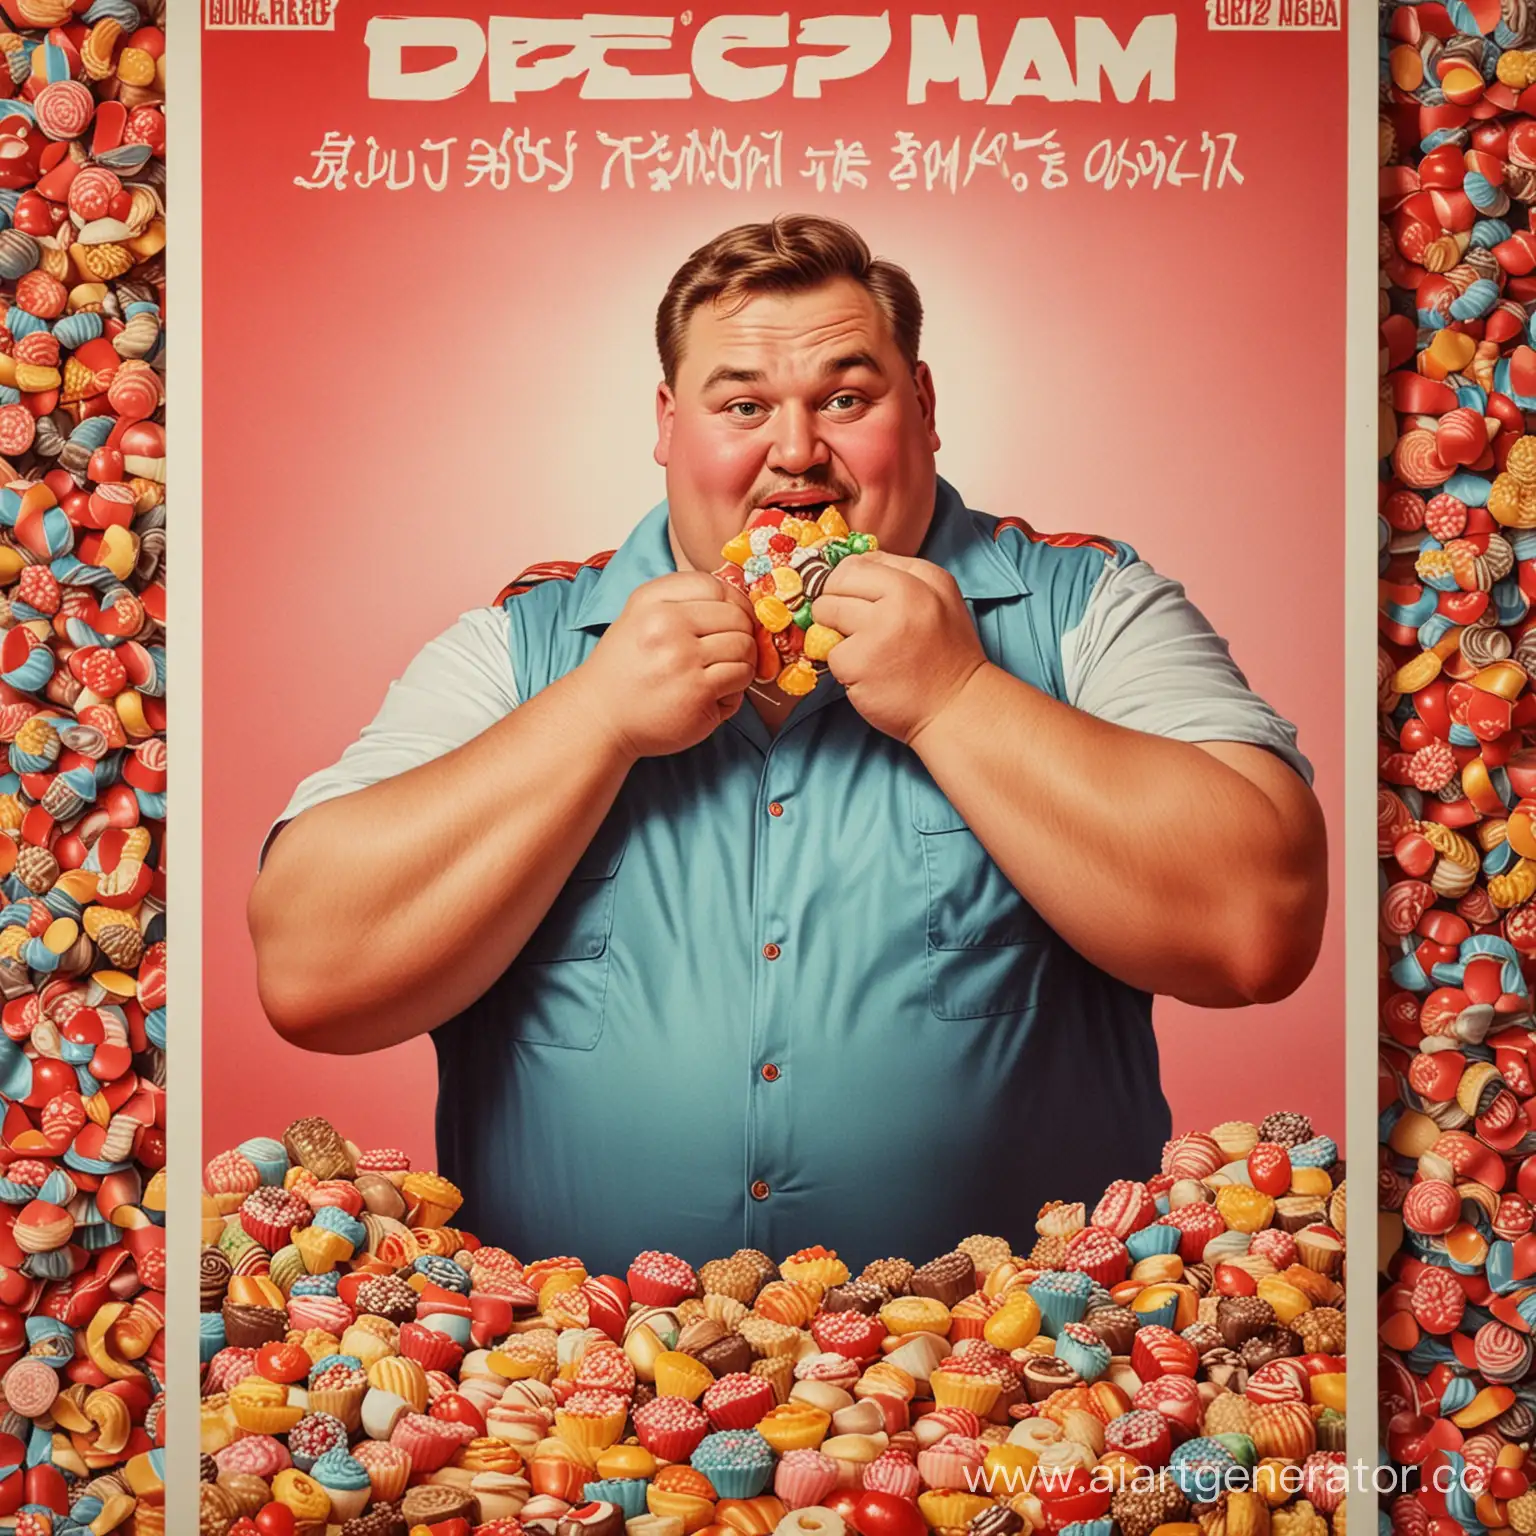 Indulgent-Consumption-SovietStyle-Poster-Featuring-Overweight-Man-Devouring-Sweets